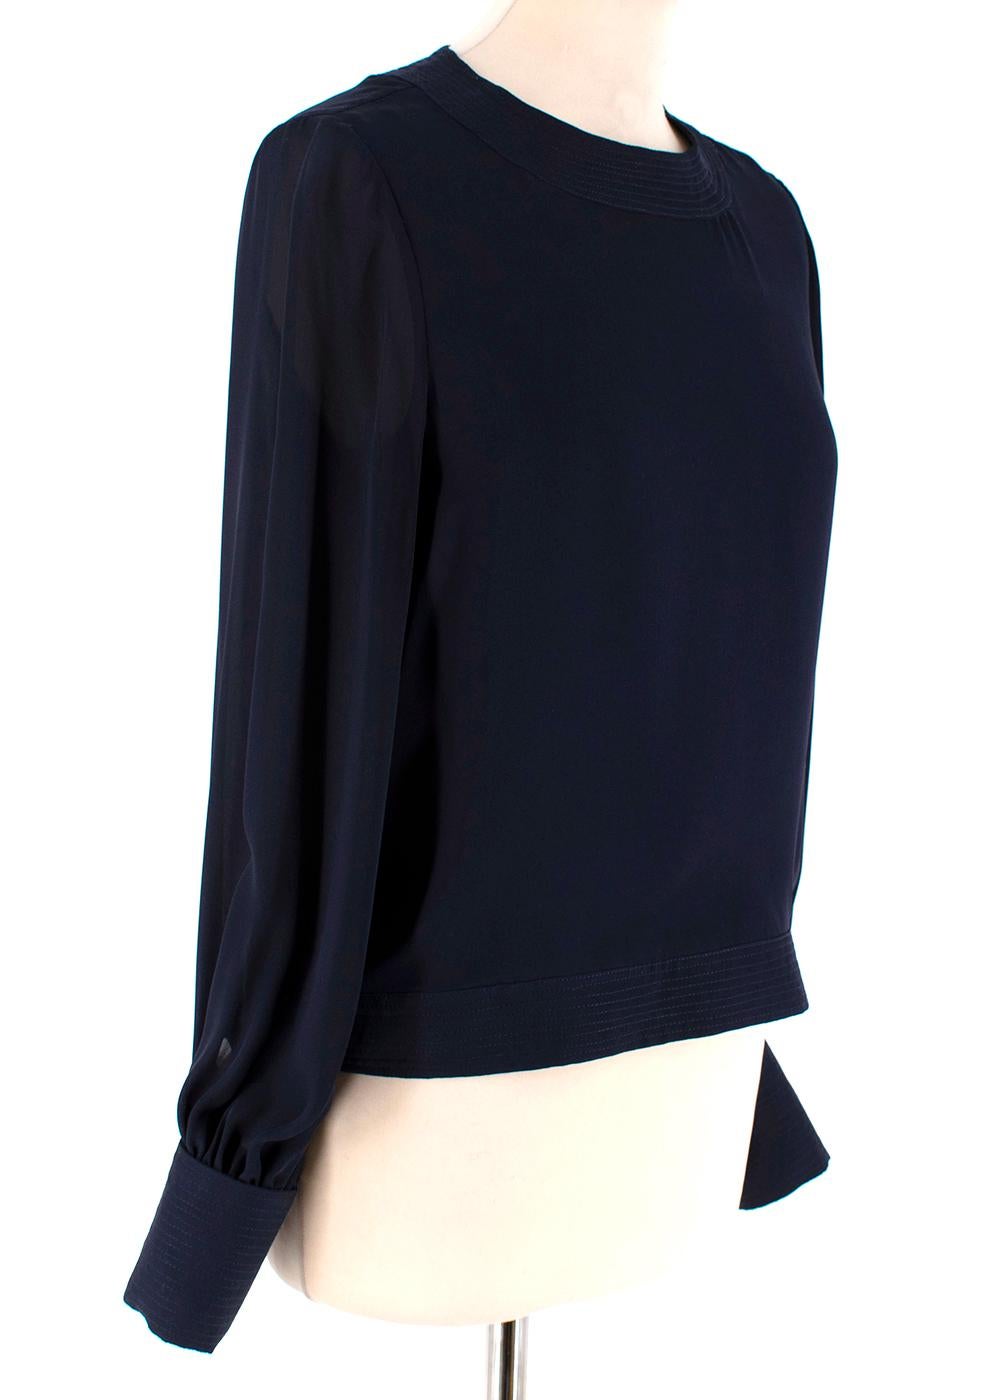 Oscar de la Renta Navy Blue Blouse with Large Rose Button Cuffs

- Navy Blue 
- Round neck 
- Cuffed Sleeves 
- White Rose button detail on cuffs 
- Bow detail on lower back 
- Lightweight 

Materials:
- 100% Silk
- Dry Clean only 

Made in USA